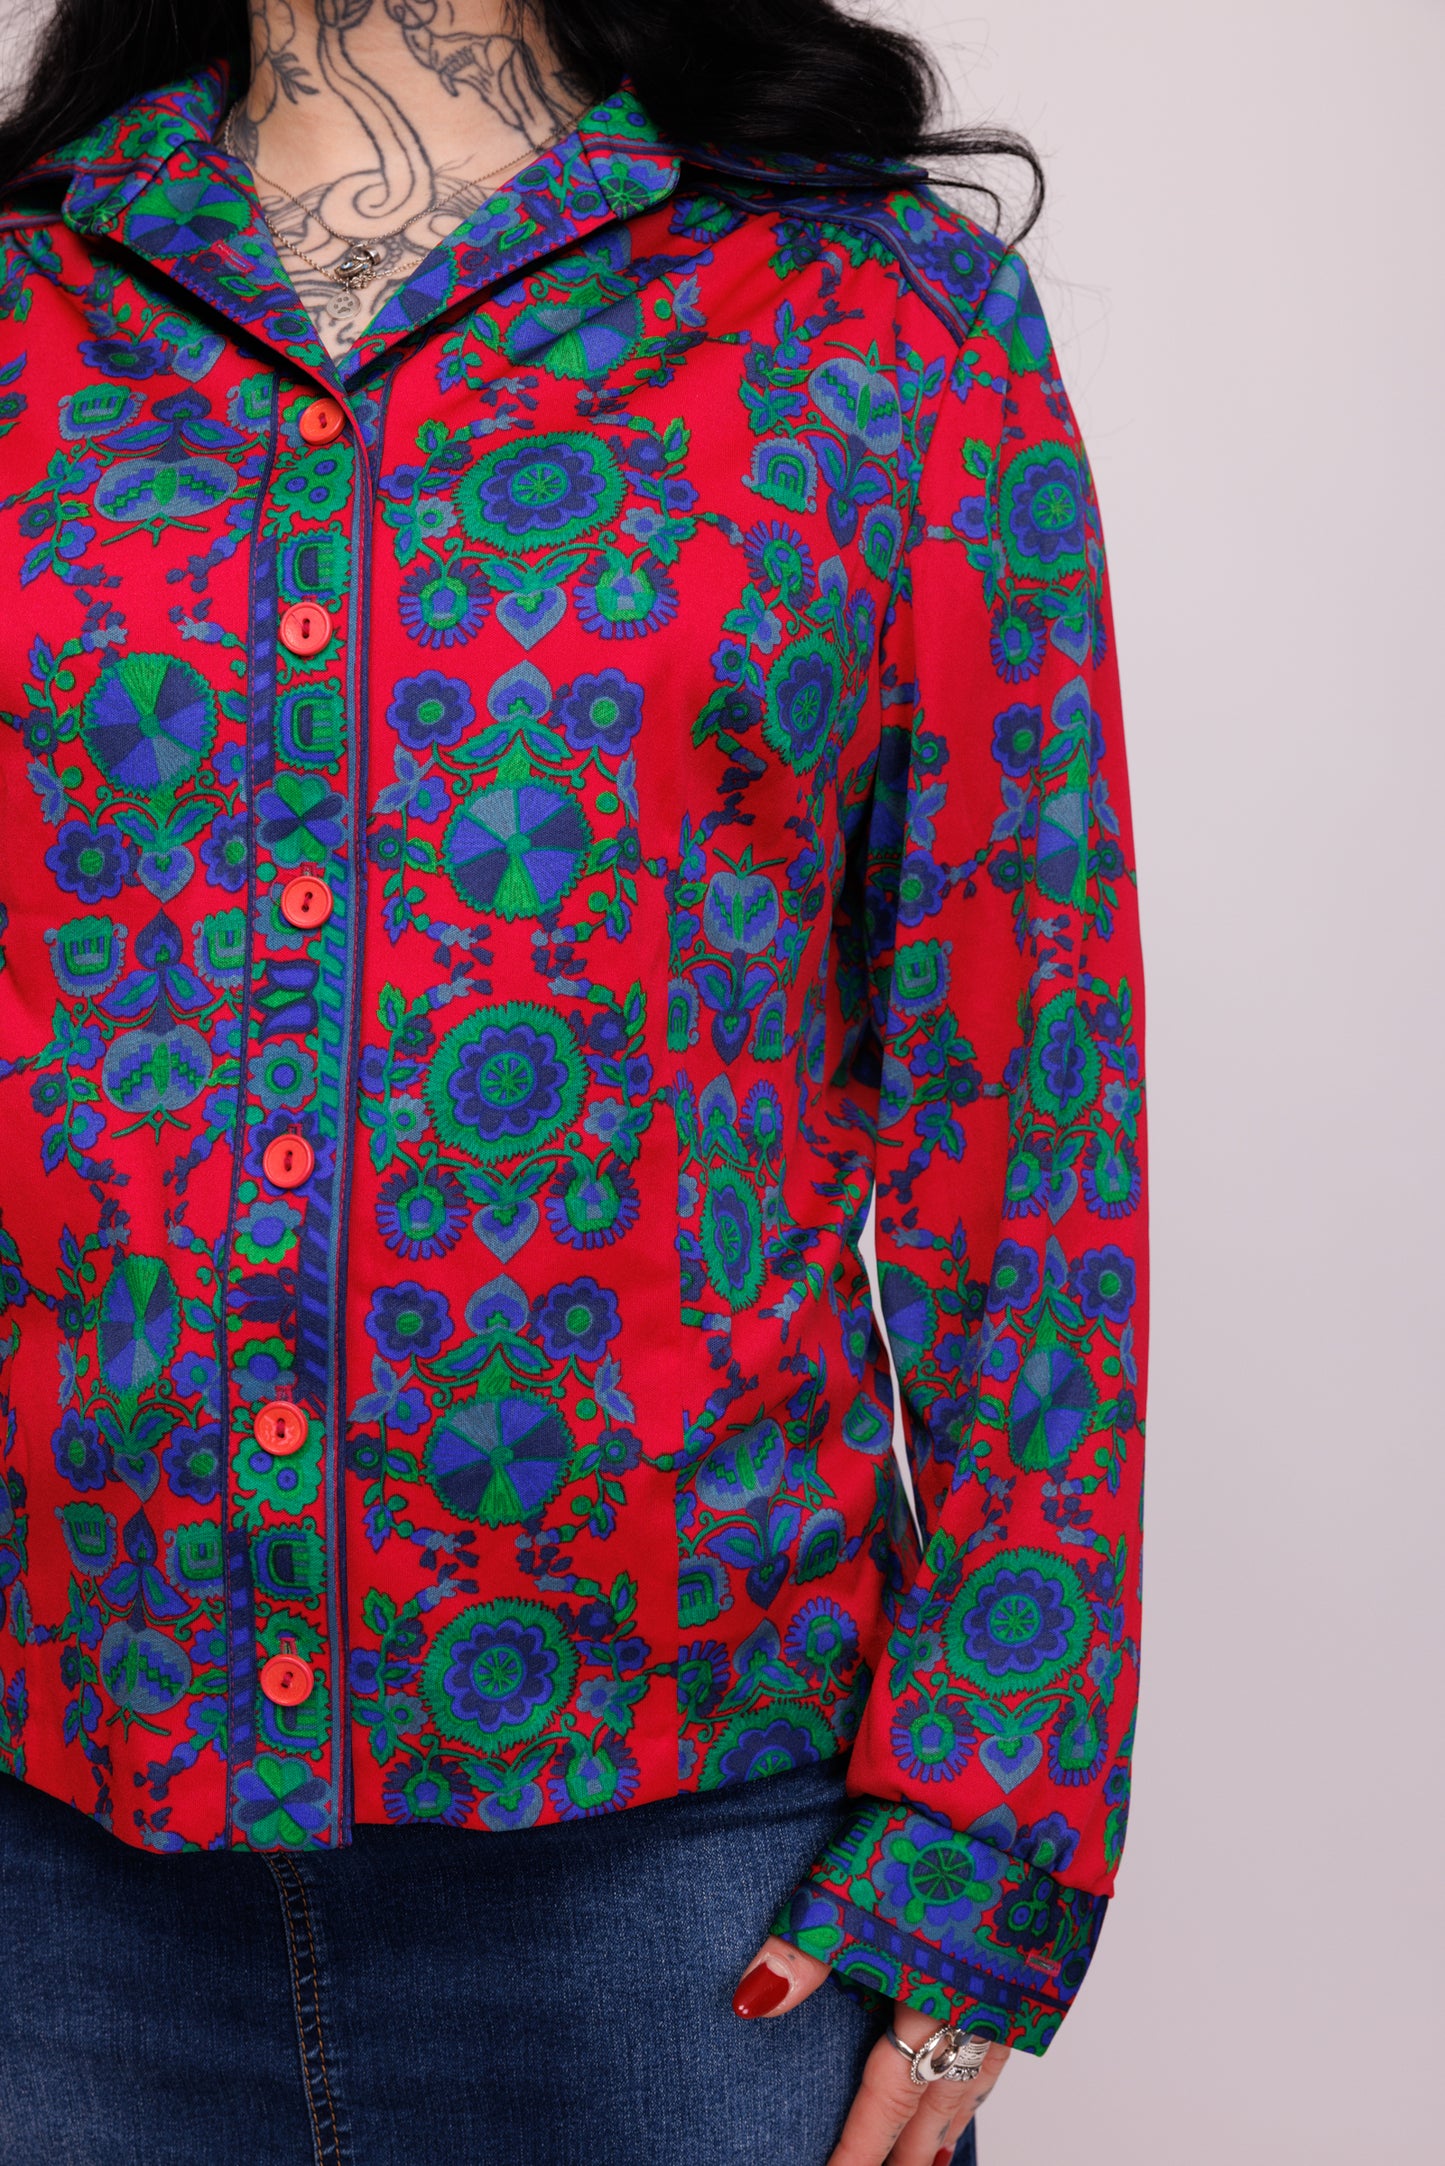 70's Patterned Shirt S/M